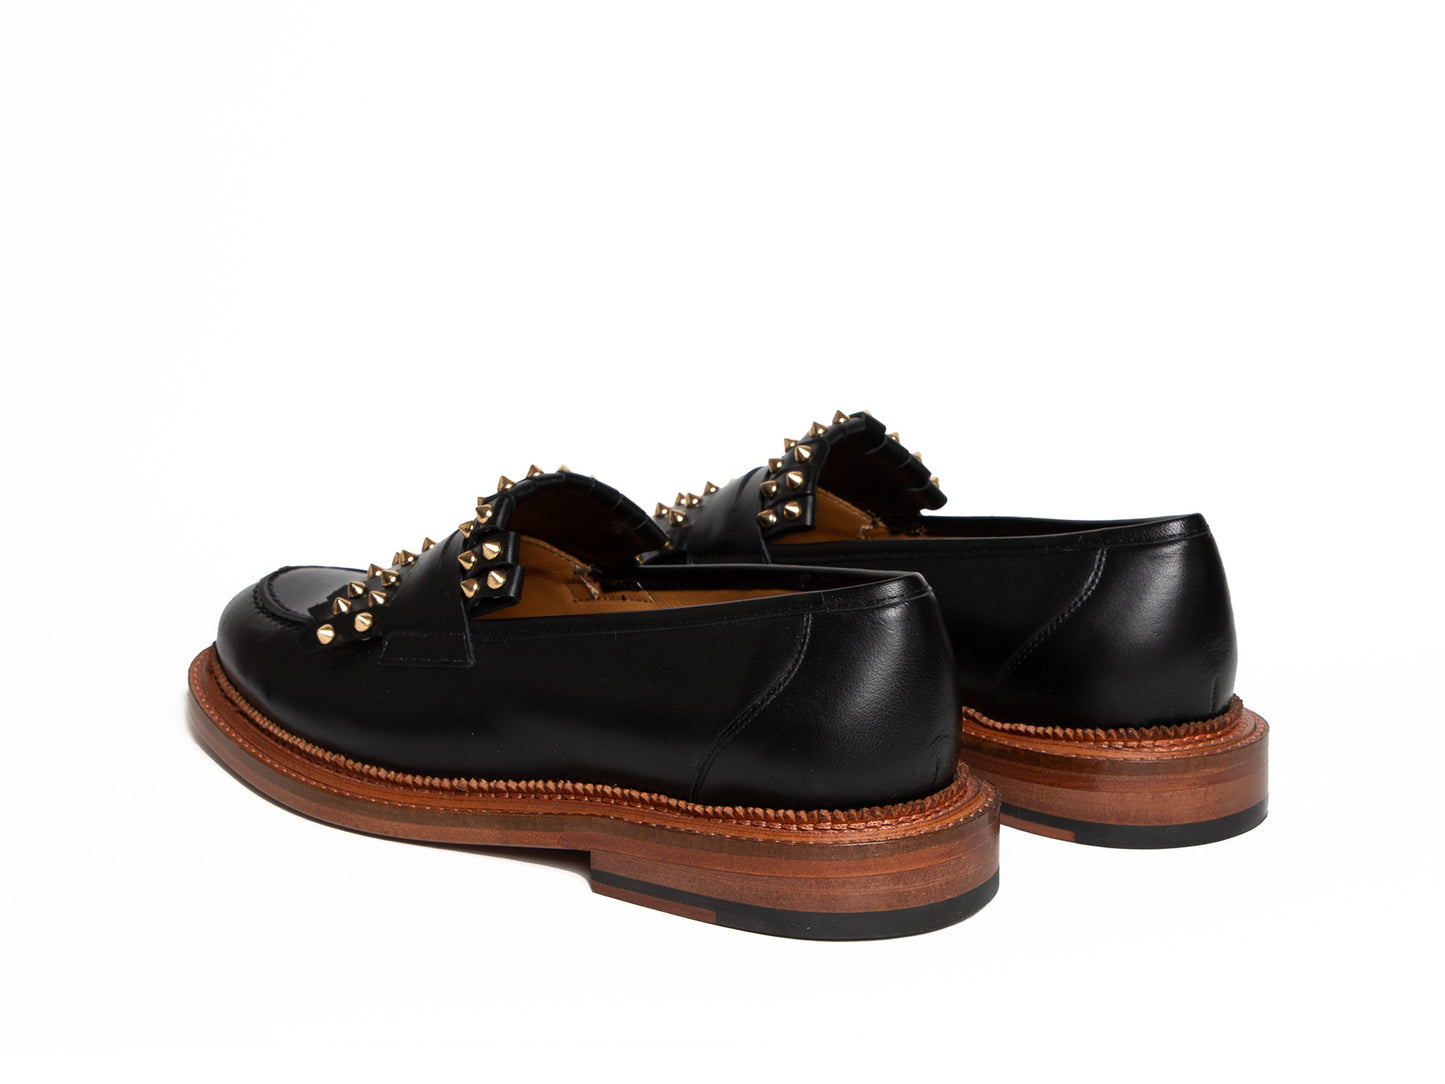 LILY - Black Penny Loafer with Studded Kiltie